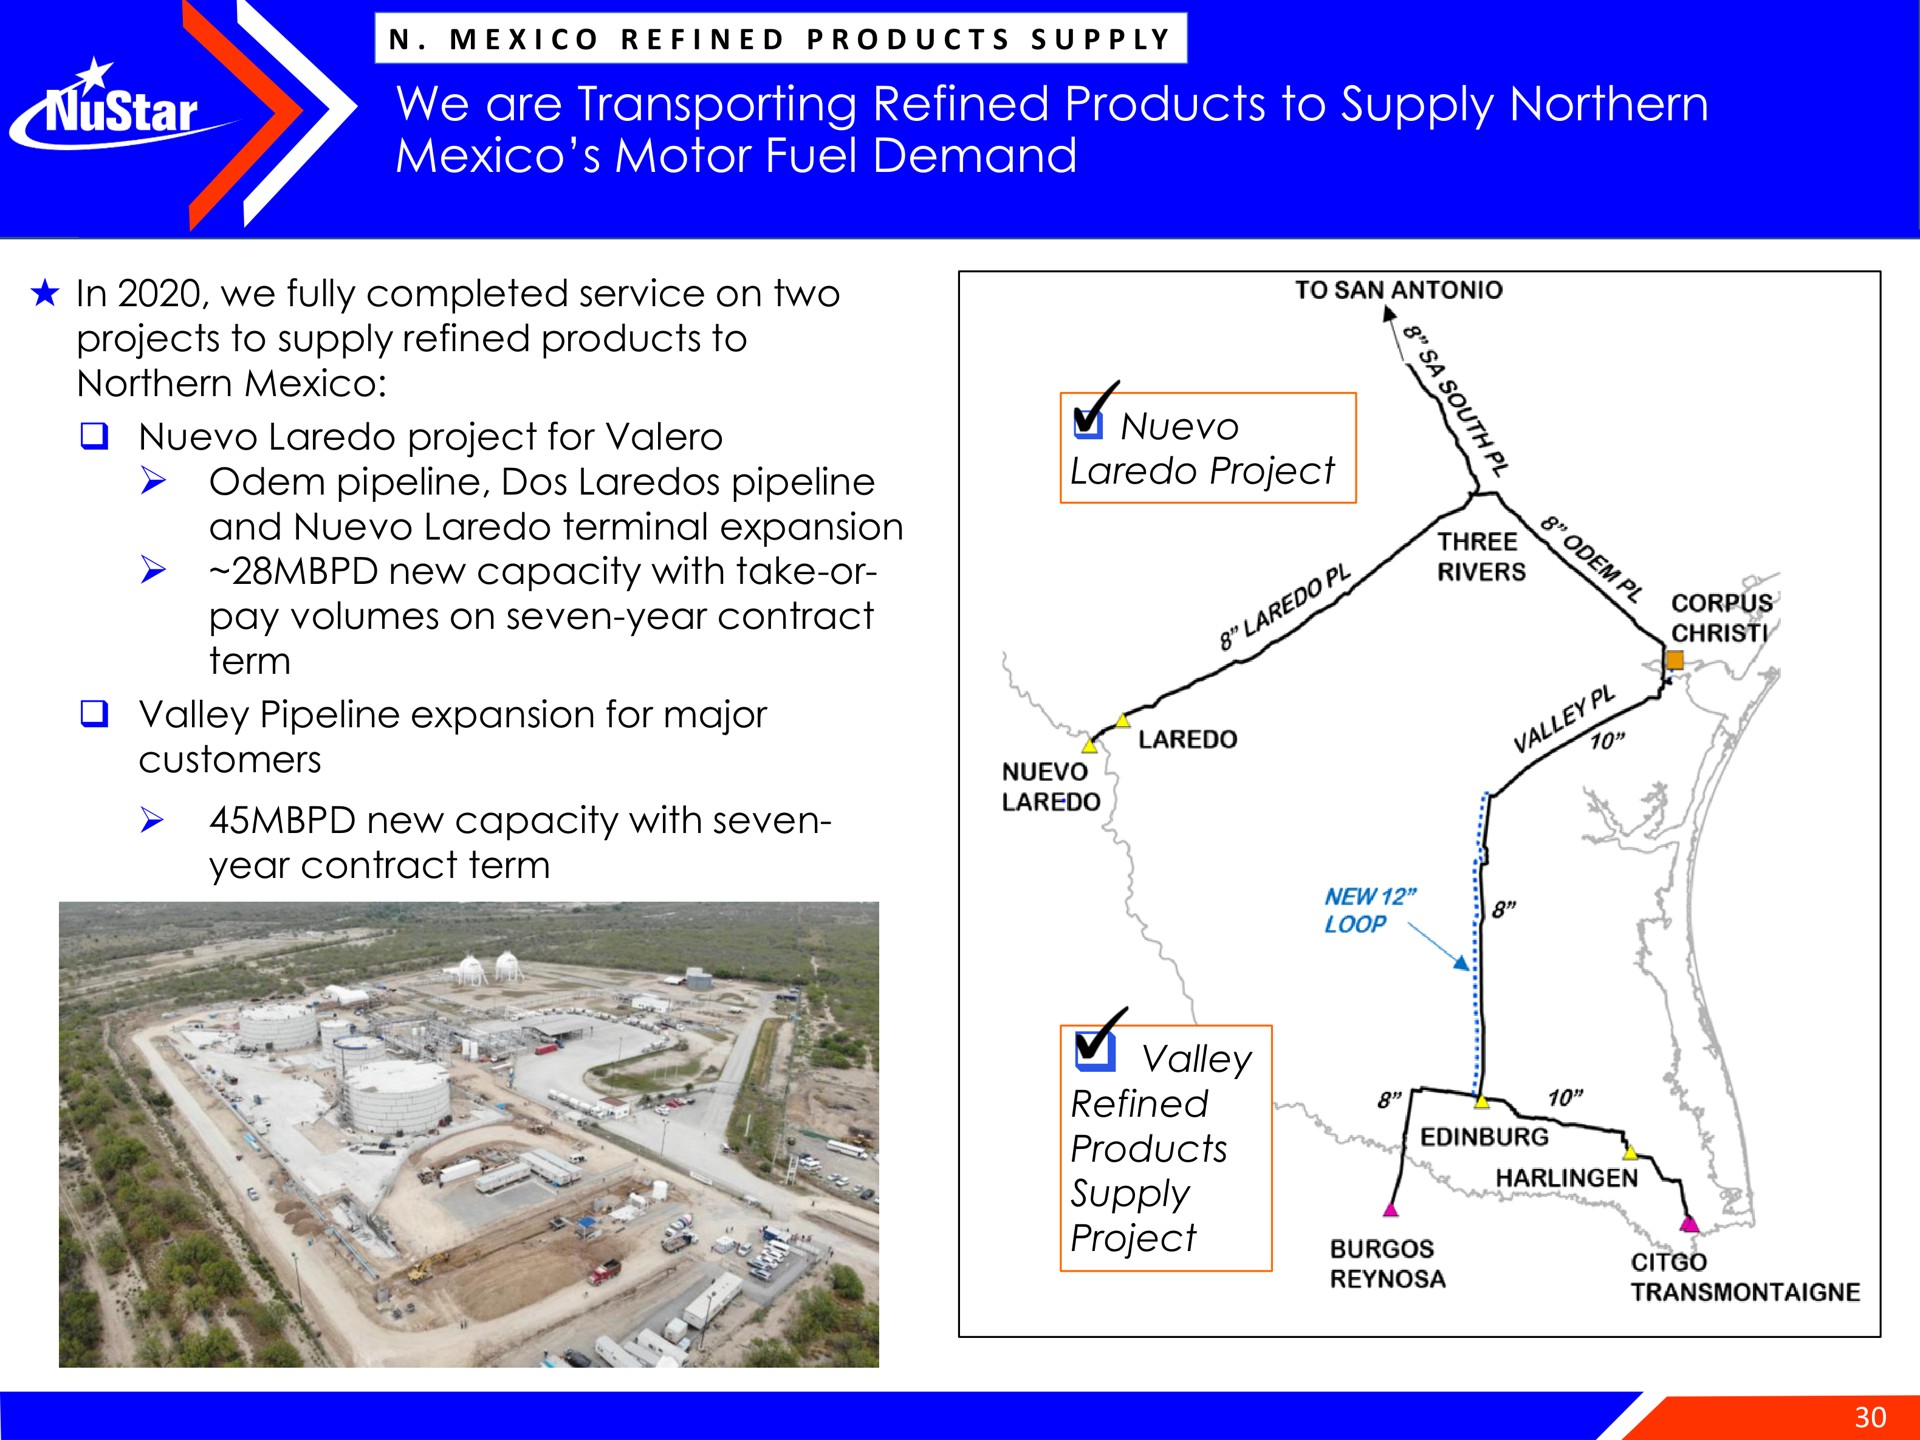 we are transporting refined products to supply northern motor fuel demand | NuStar Energy